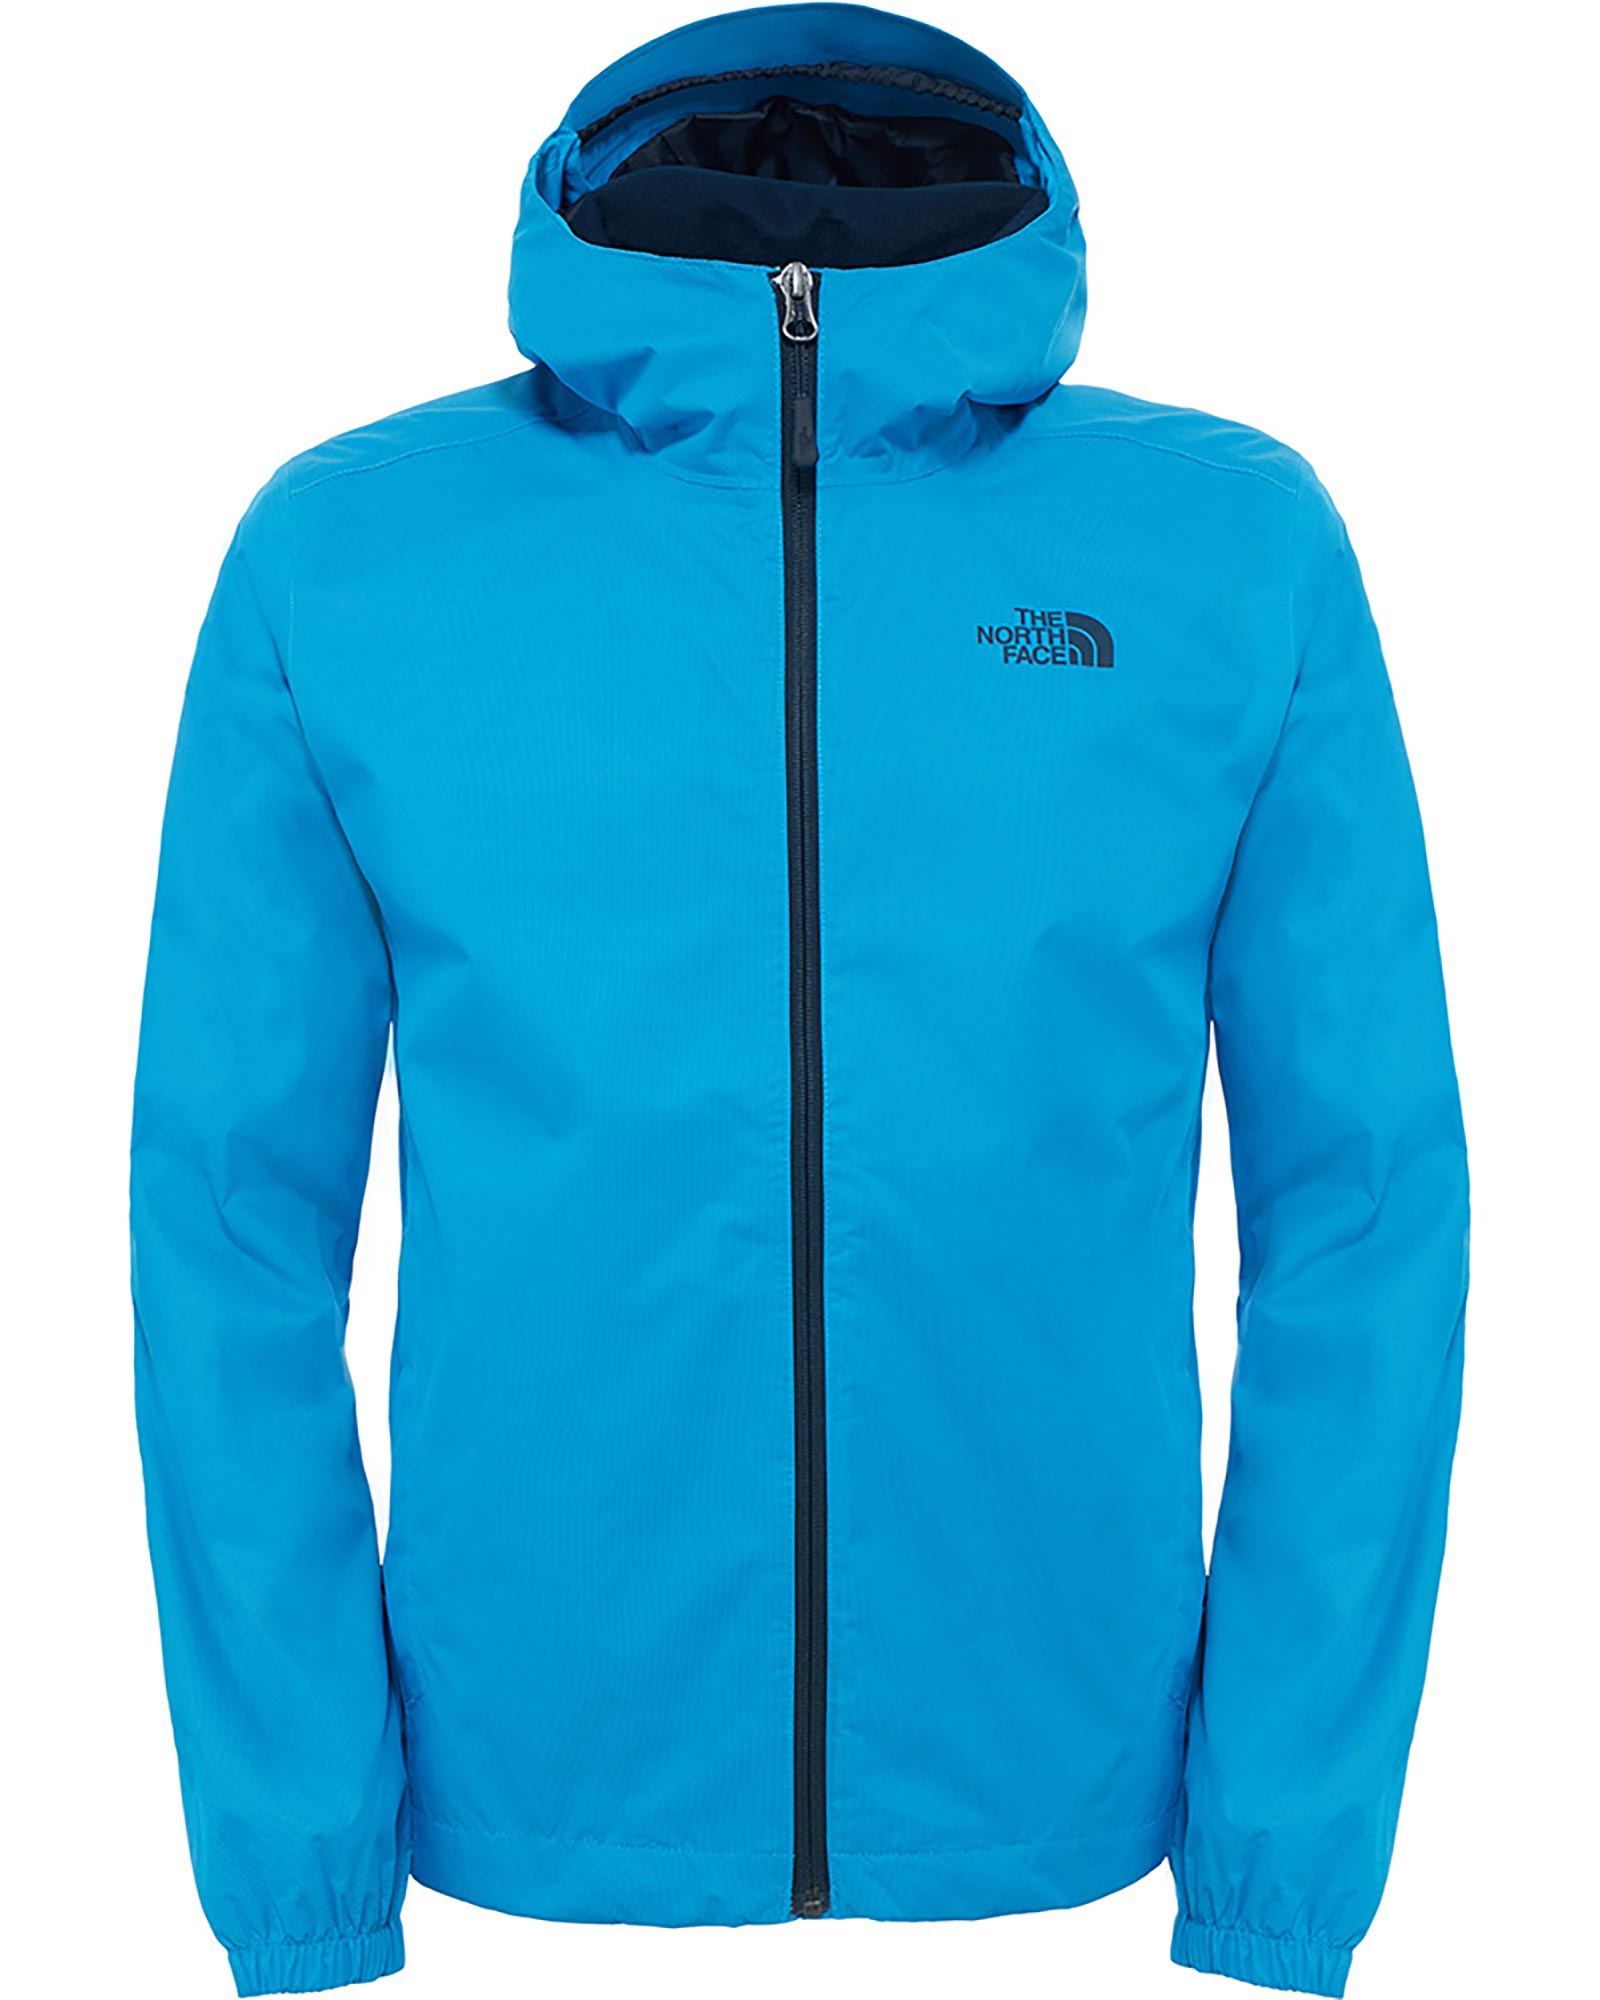 The North Face Quest DryVent Men’s Jacket - Optic Blue Black Heather XL